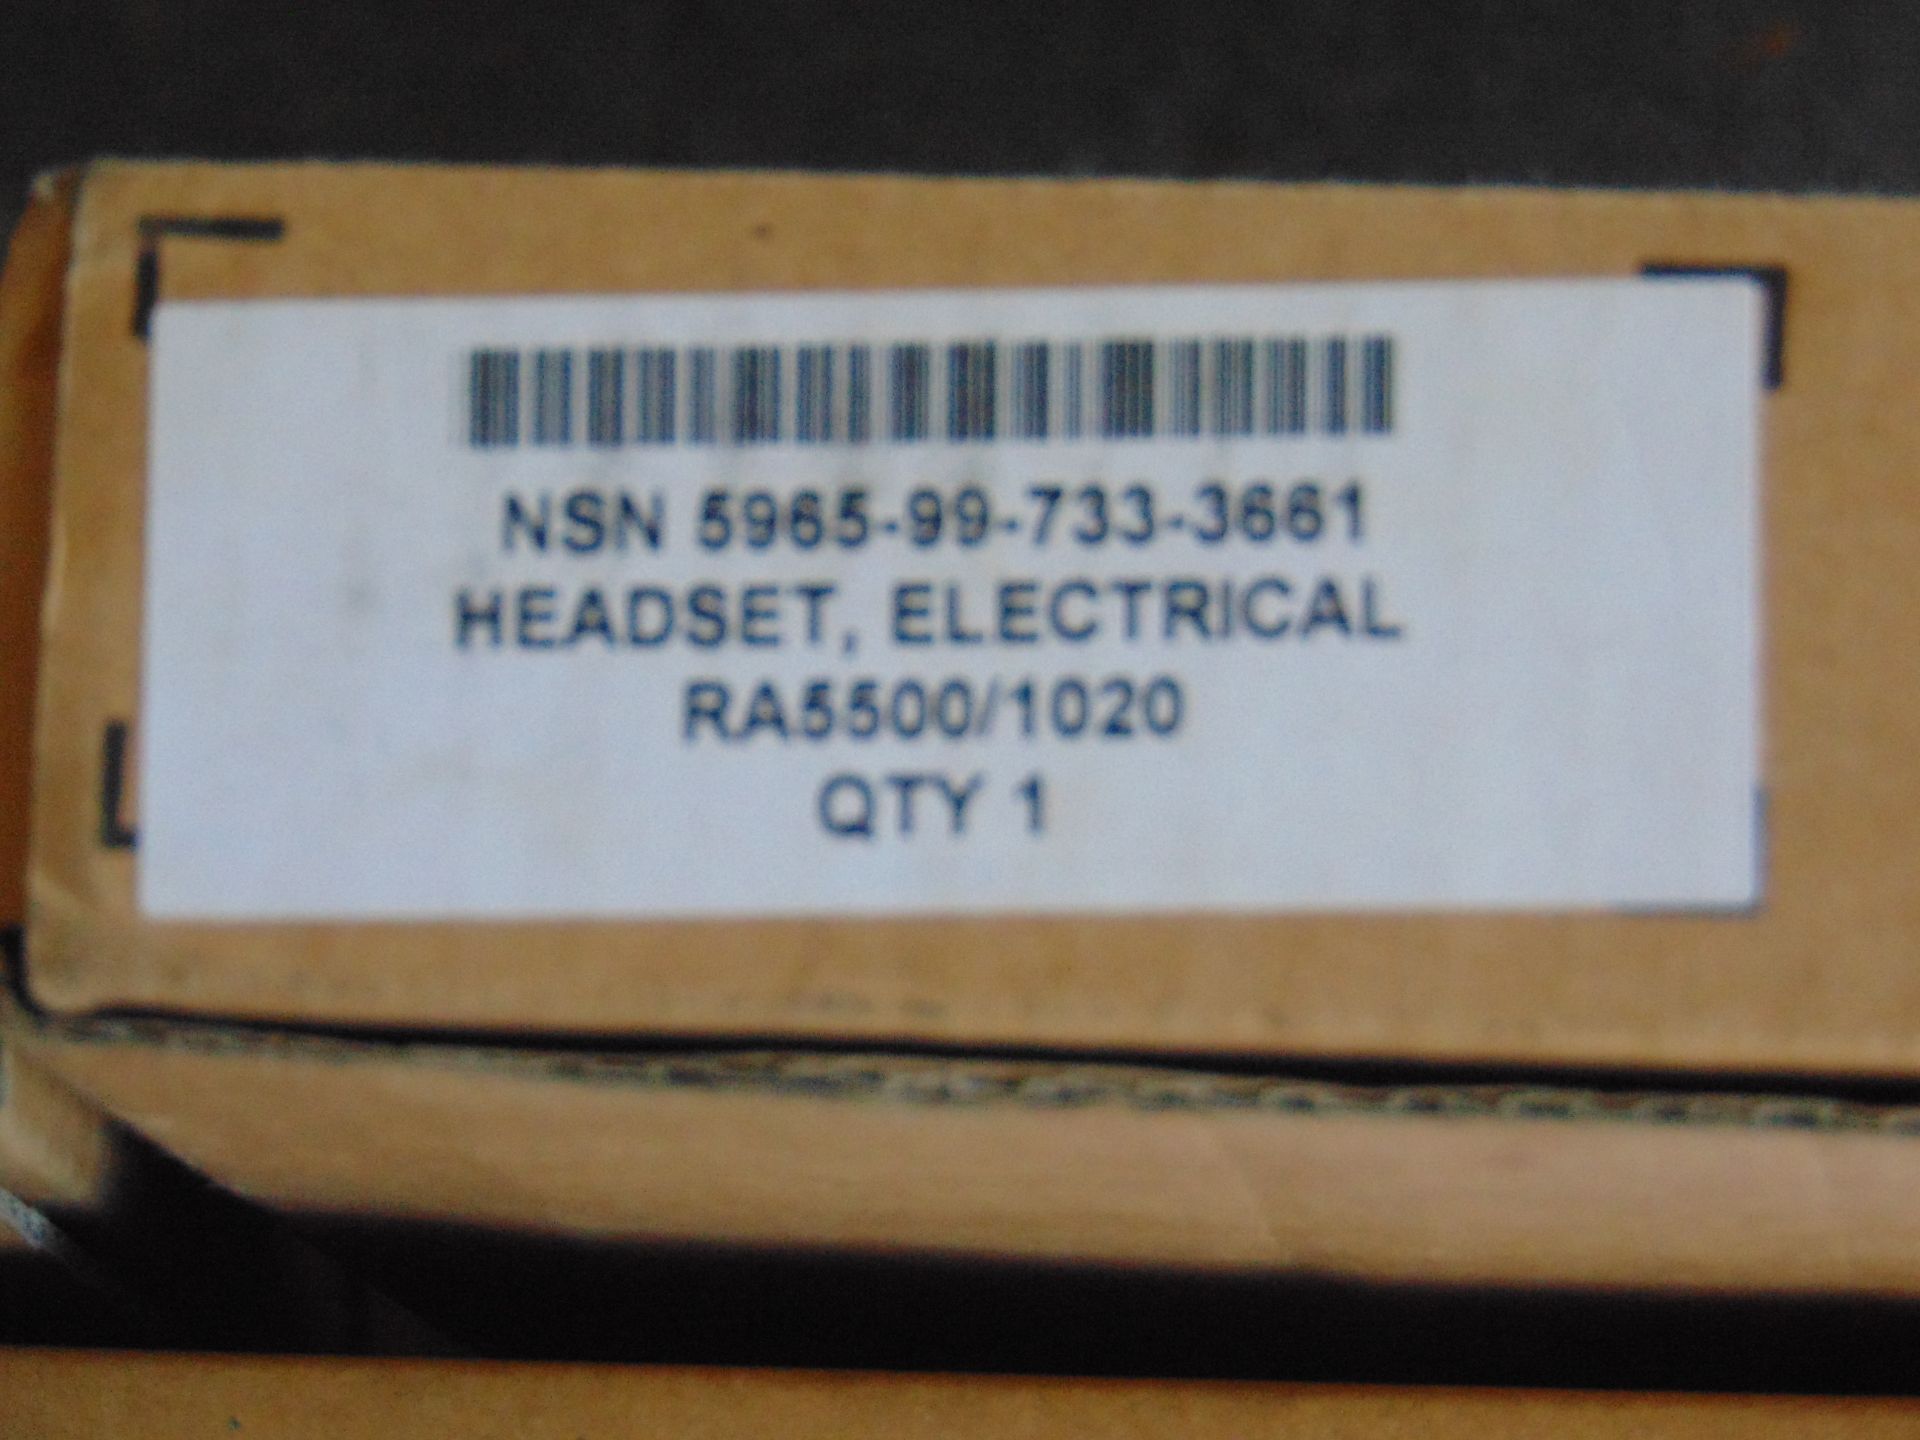 20X NEW UNISSUED FRONTIER 1000 HEADSET COMMS SYSTEMS IN ORIGINAL PACKING WITH MANUAL - Image 3 of 6